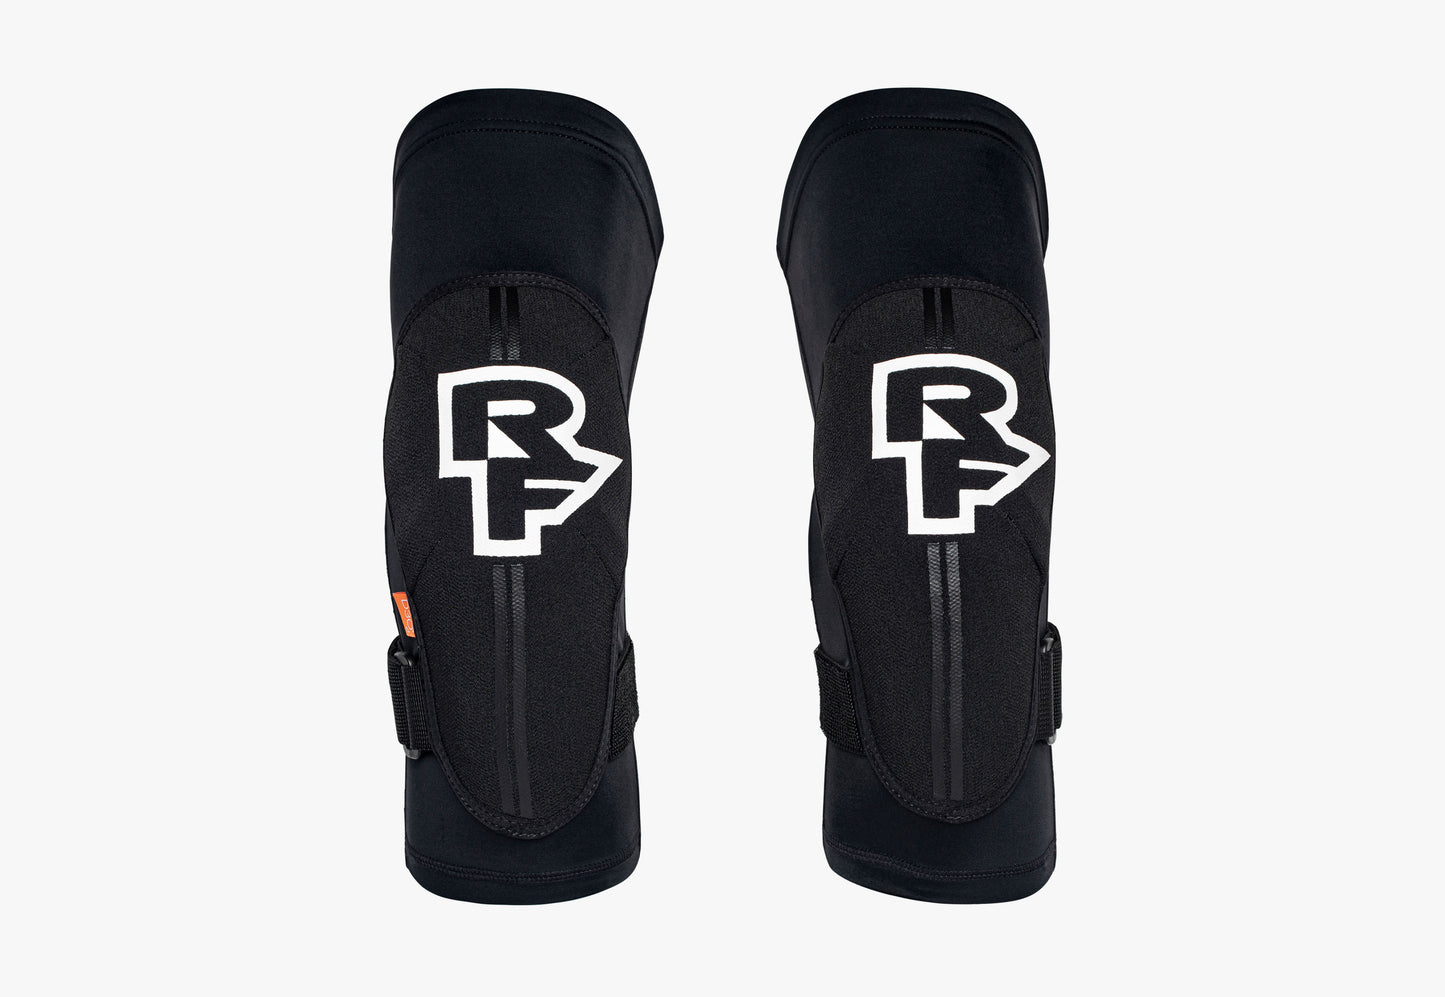 RaceFace Indy Knee Pad Stealth 2X-Large